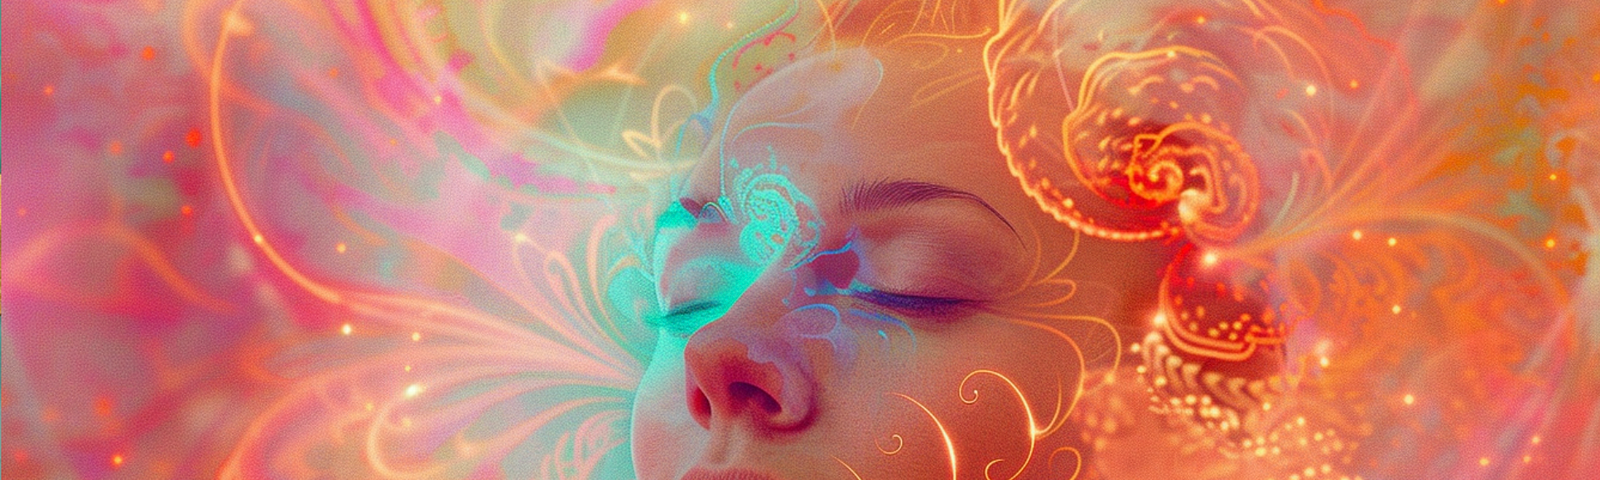 A woman with eyes closed contemplates her Oversoul; hues of pink, orange, gold and turquoise swirl around her head.